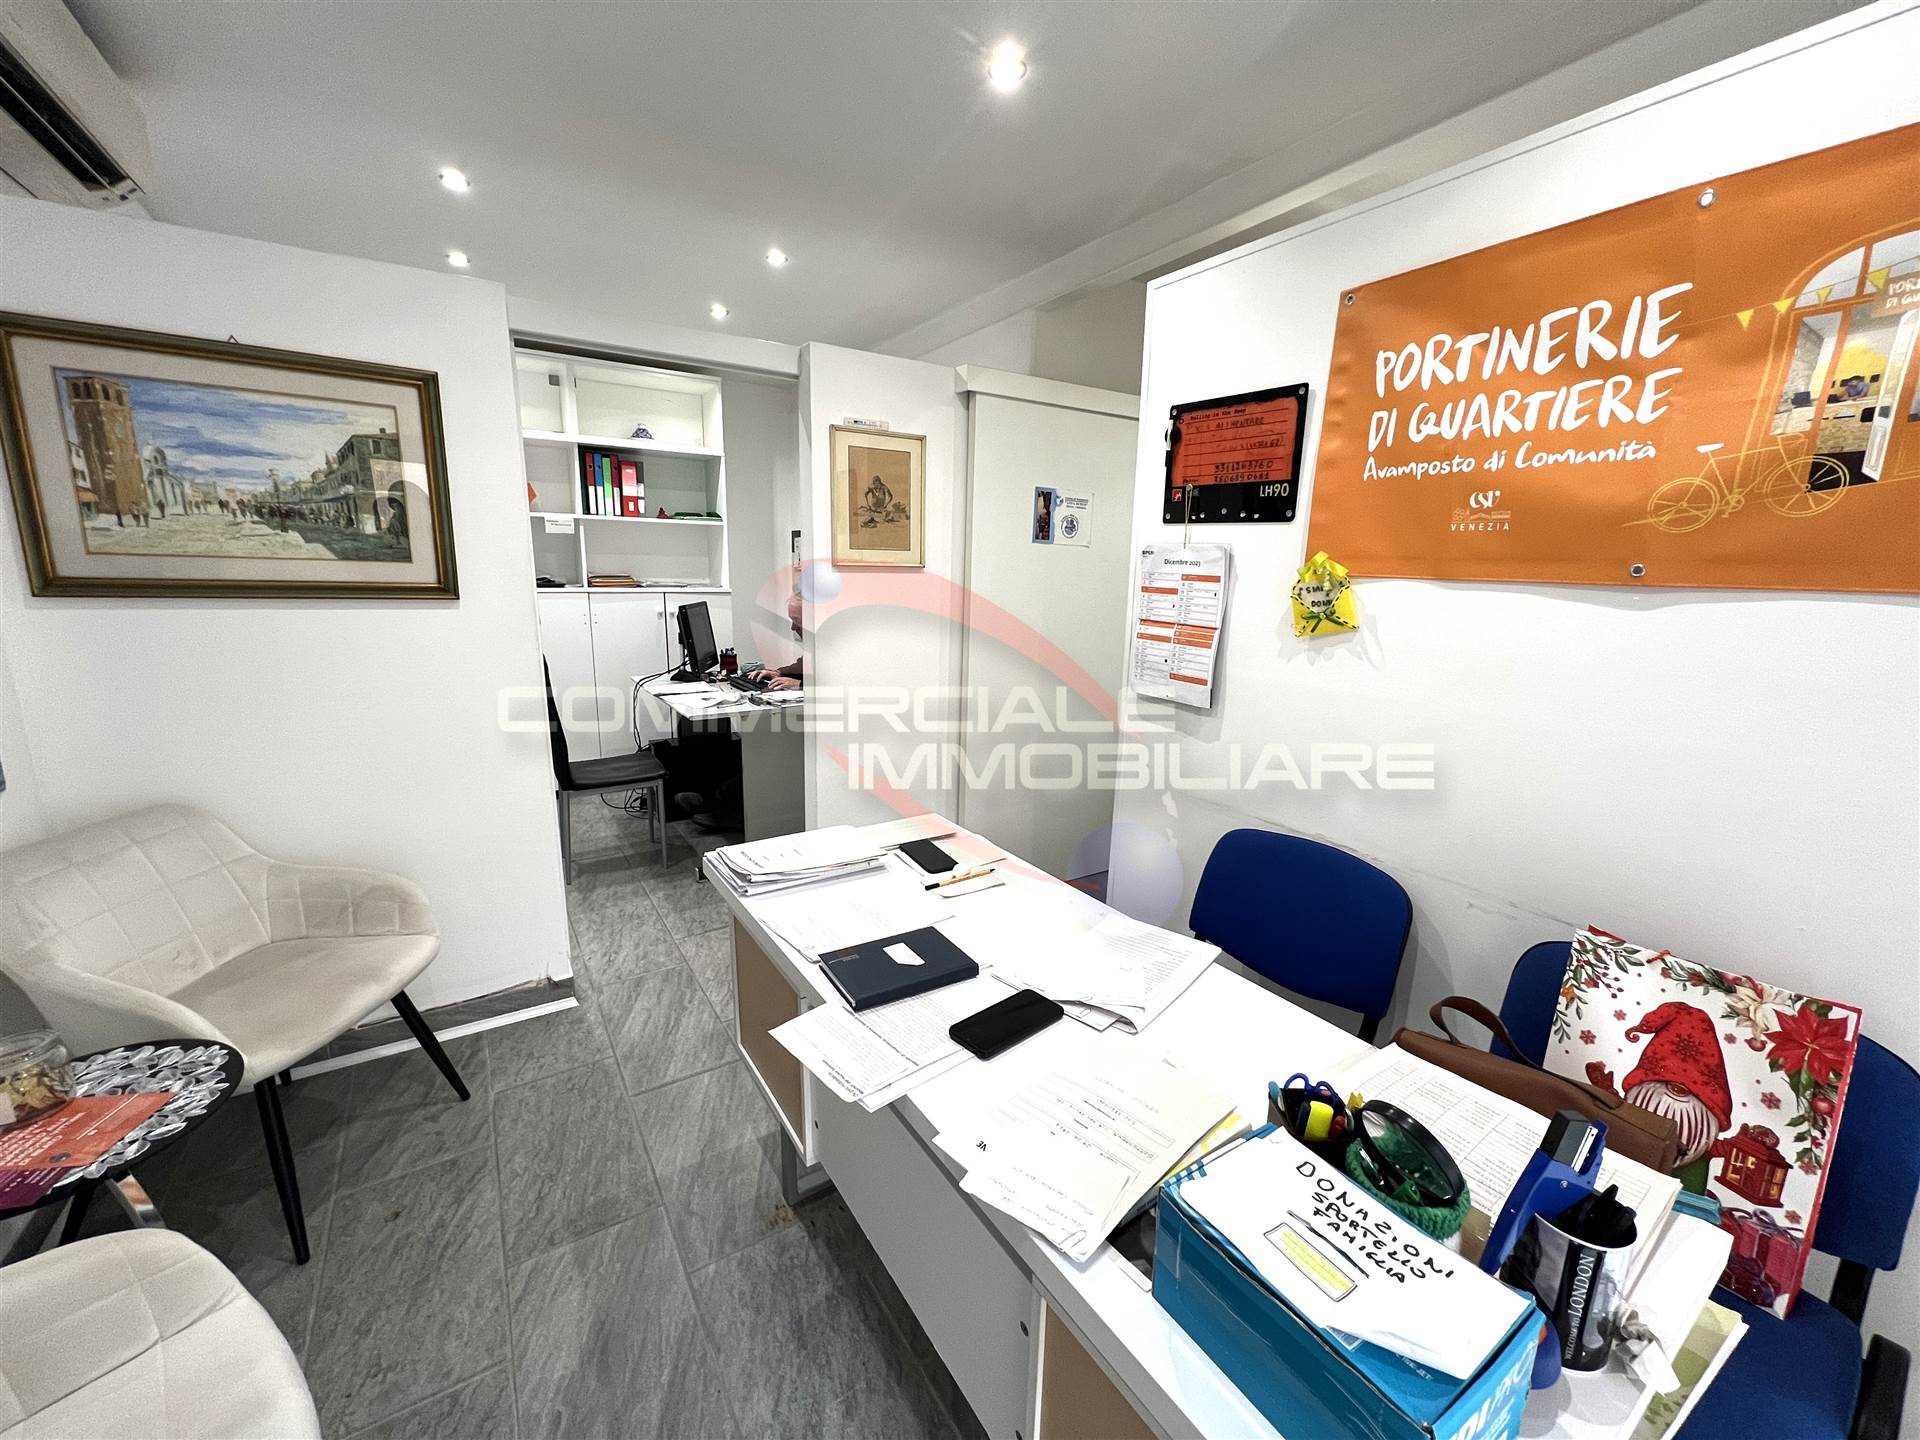 CHIOGGIA CENTRO, CHIOGGIA, Apartment for sale of 40 Sq. mt., Heating Individual heating system, Energetic class: G, Epi: 374,38 kwh/m2 year, placed 